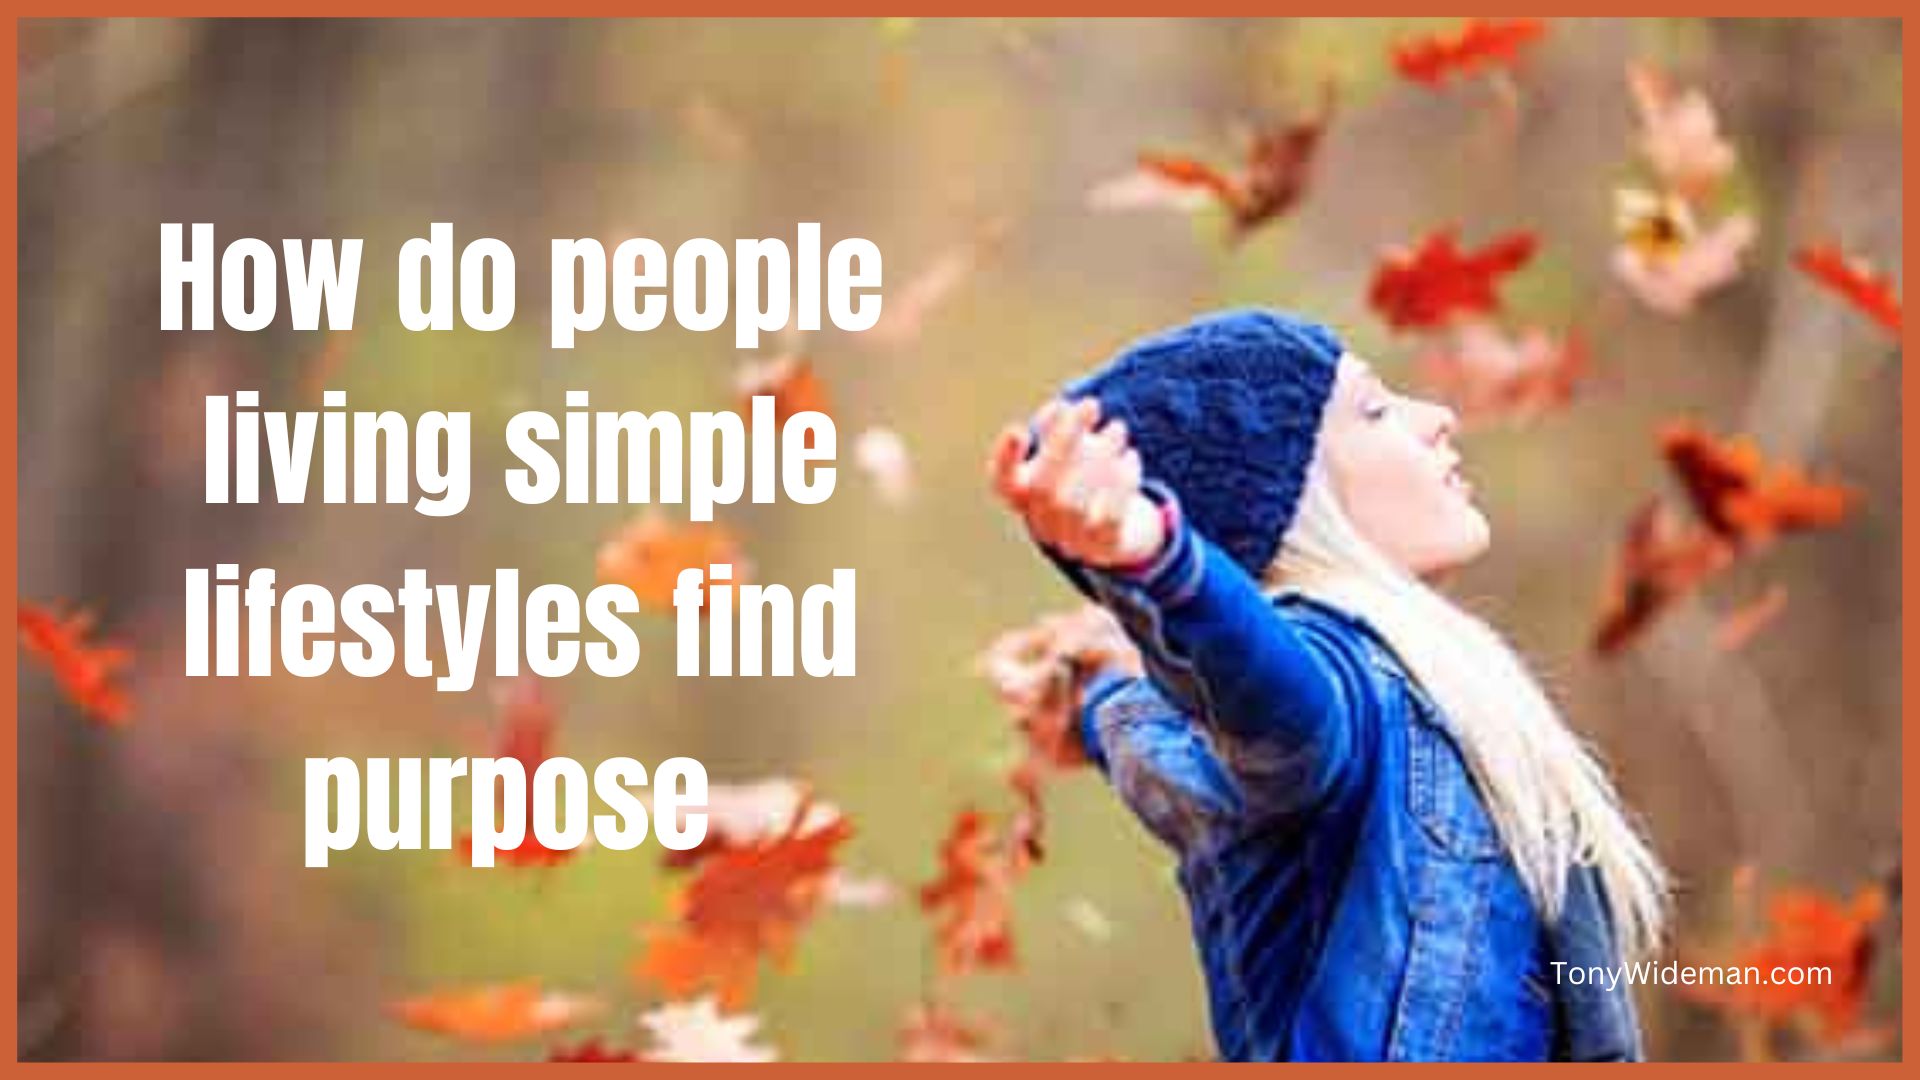 How do people living simple lifestyles find purpose?